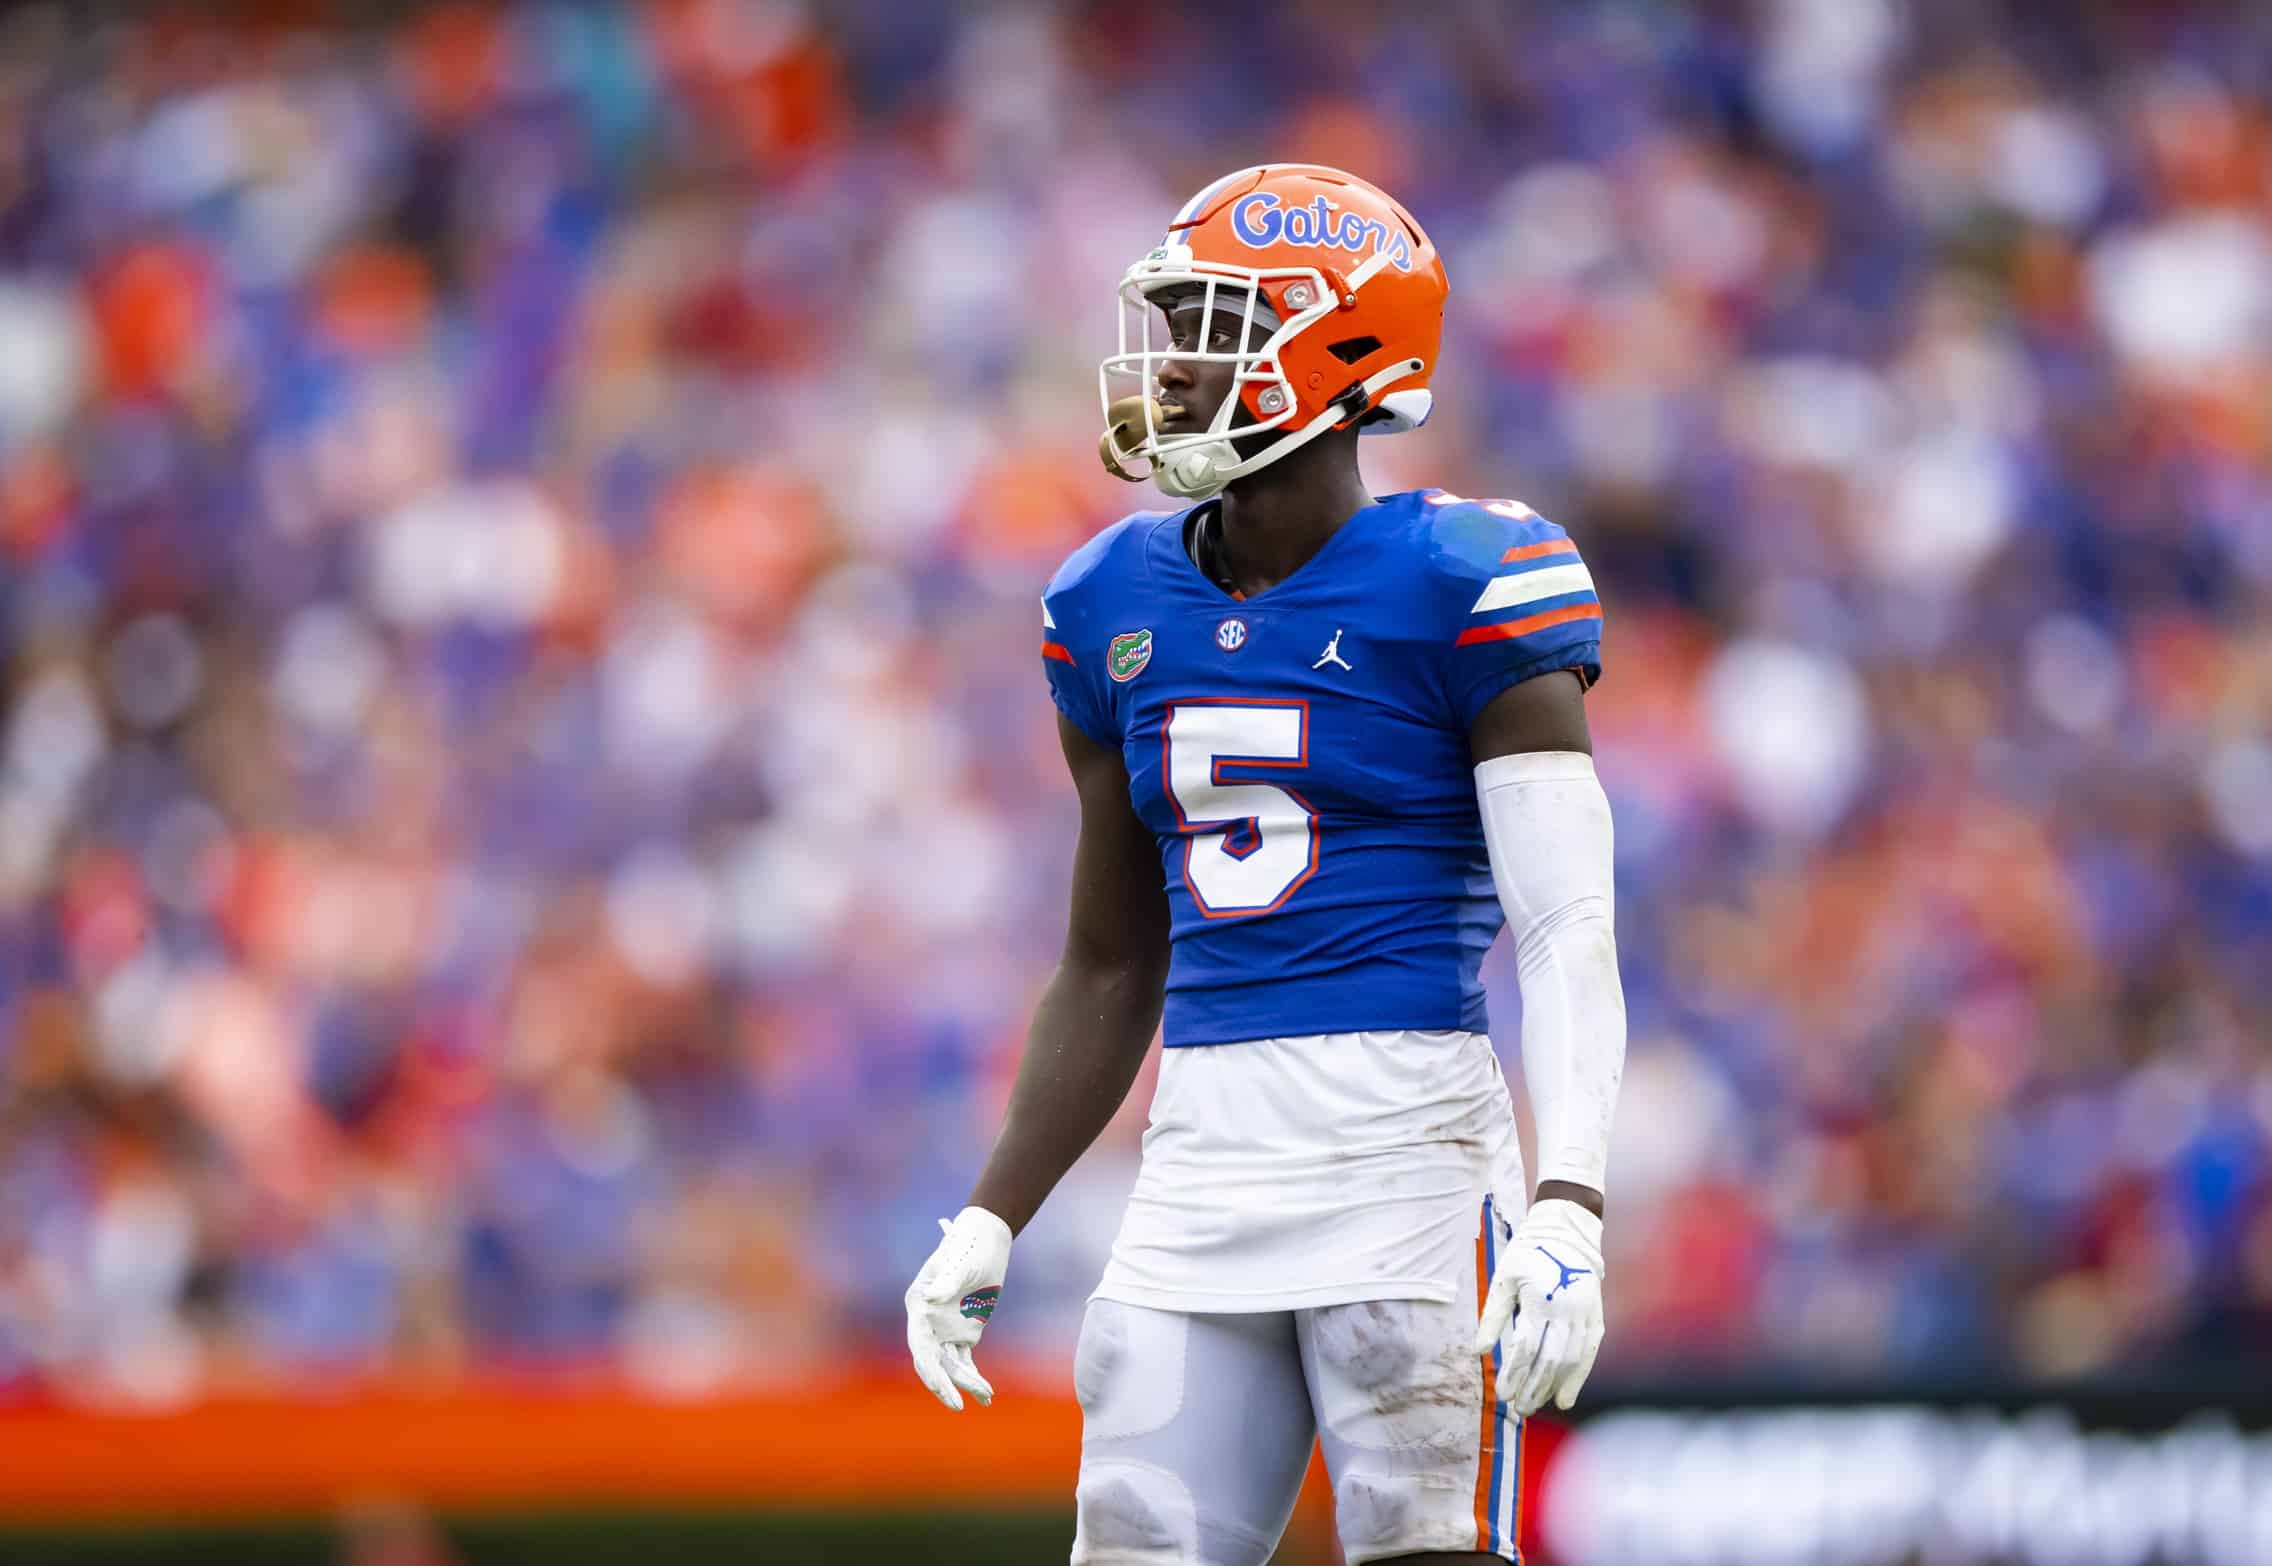 Florida 2022 NFL Draft Scouting Reports include Dameon Pierce